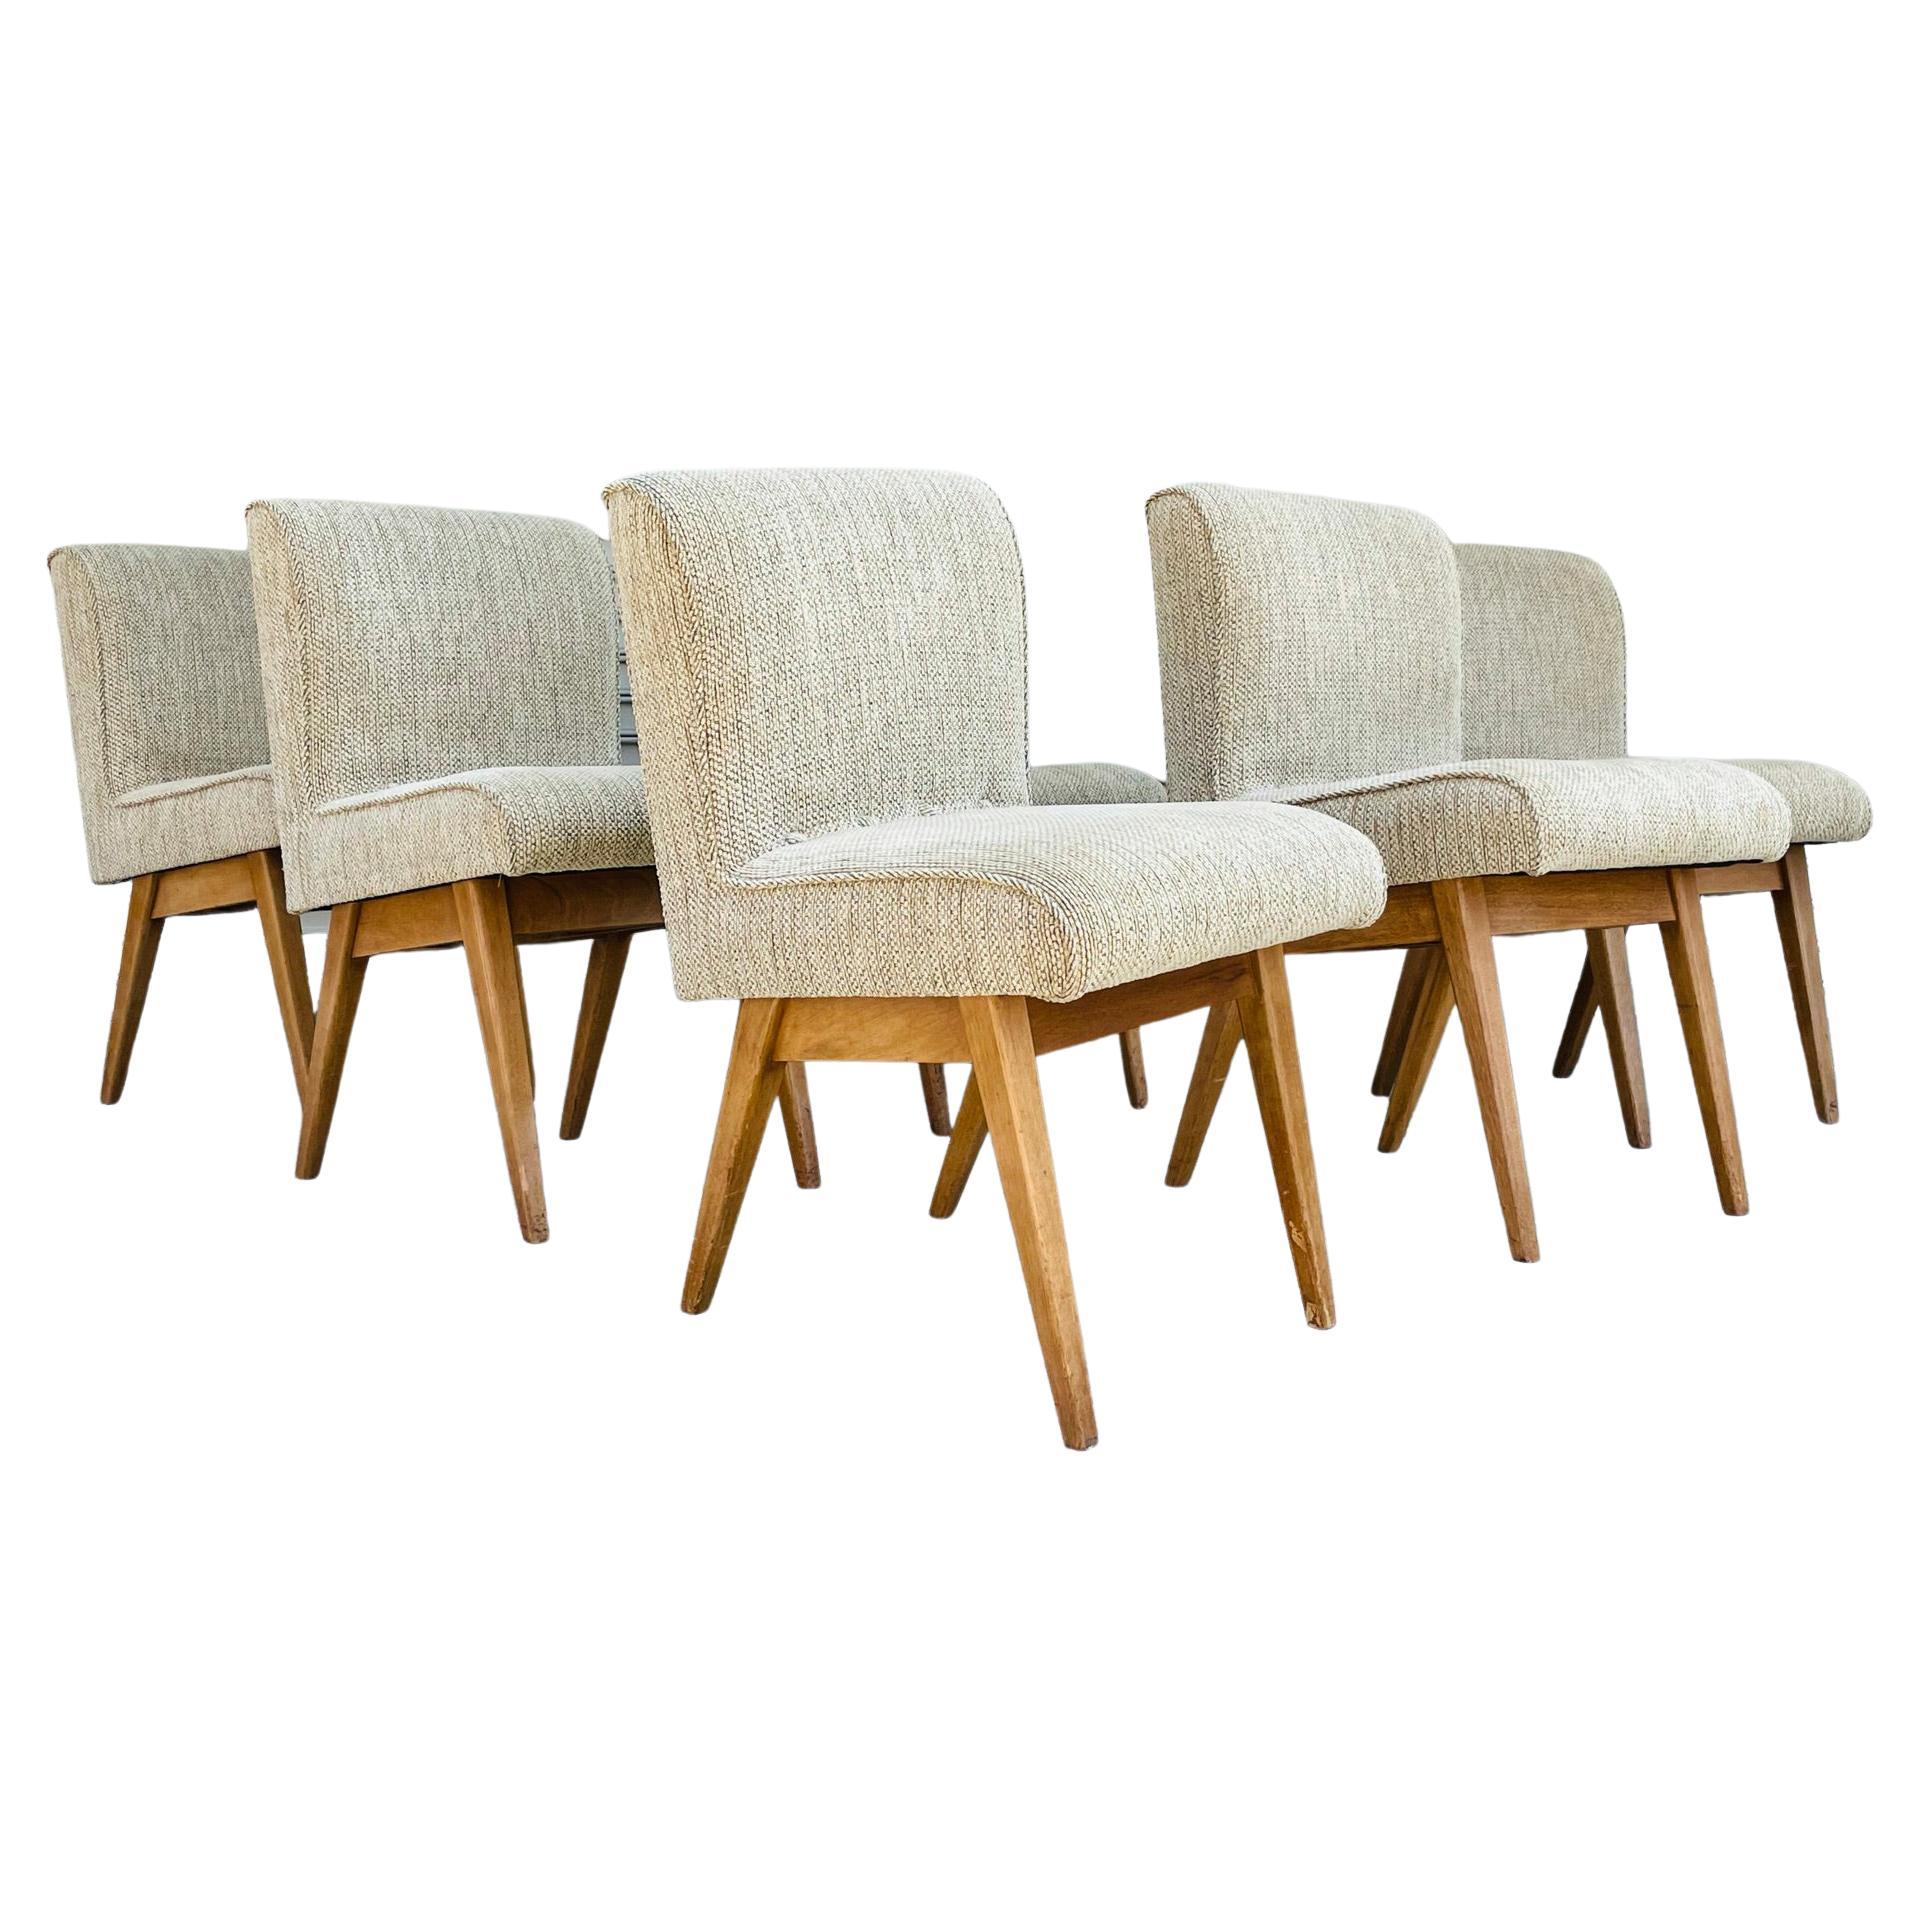 Set of 6 Dining Chairs in the Style of Jens Risom